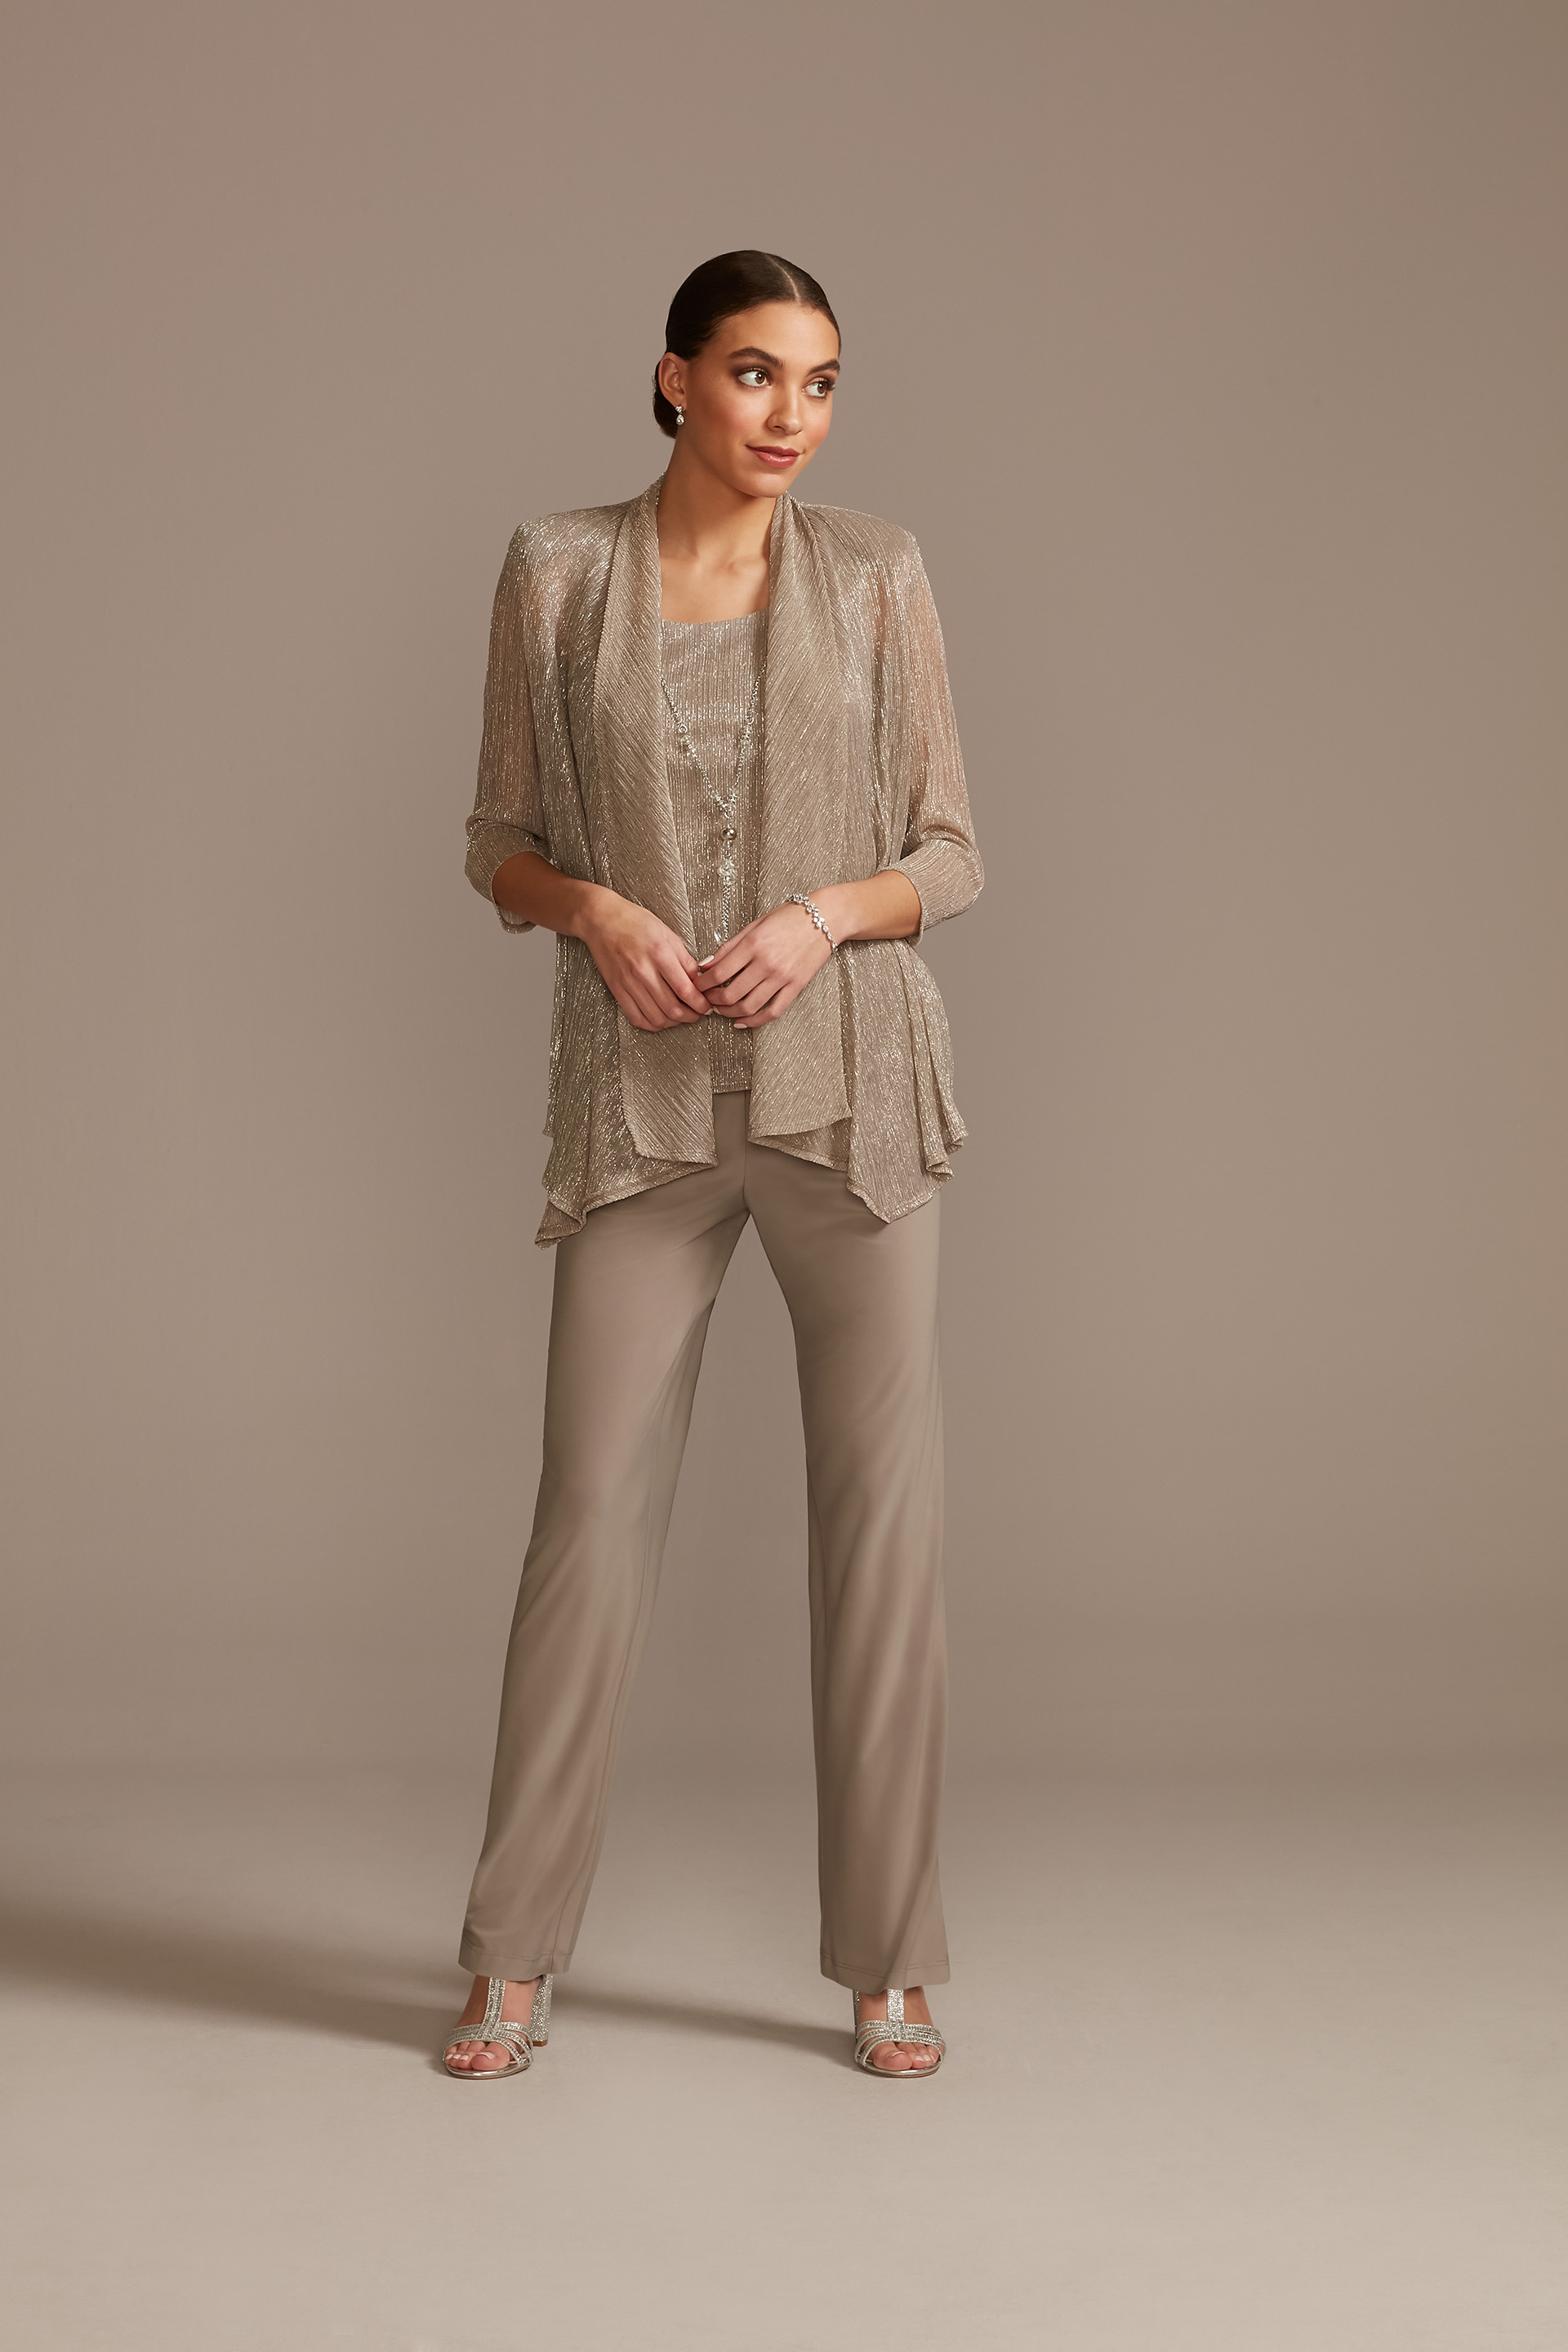 Mother of the Bride Pantsuits You'll Love